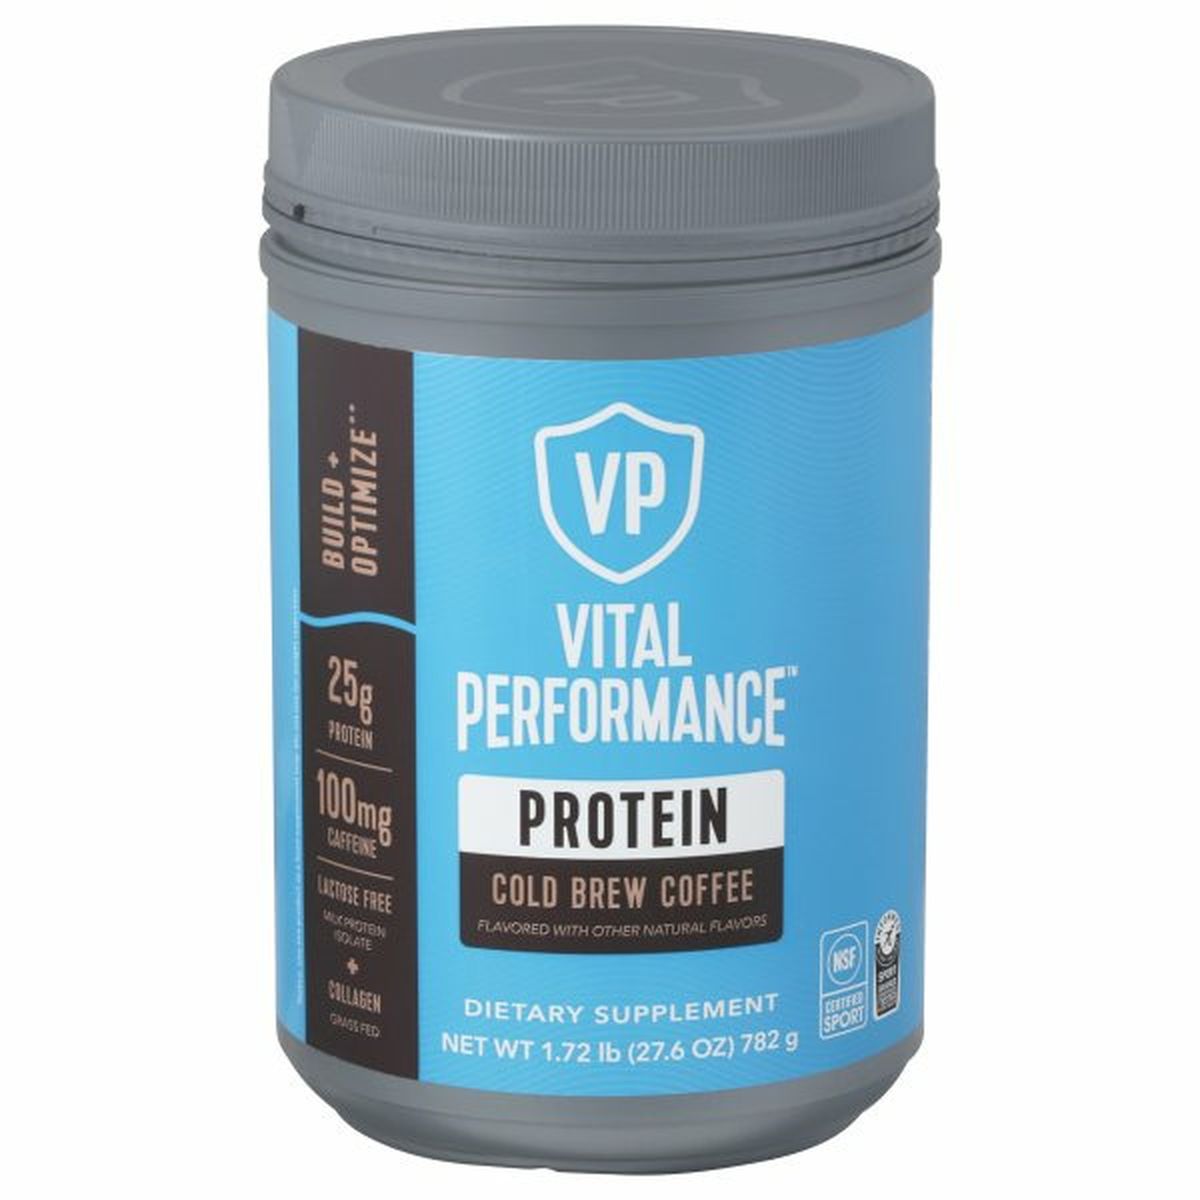 Calories in Vital Performance Protein, Cold Brew Coffee